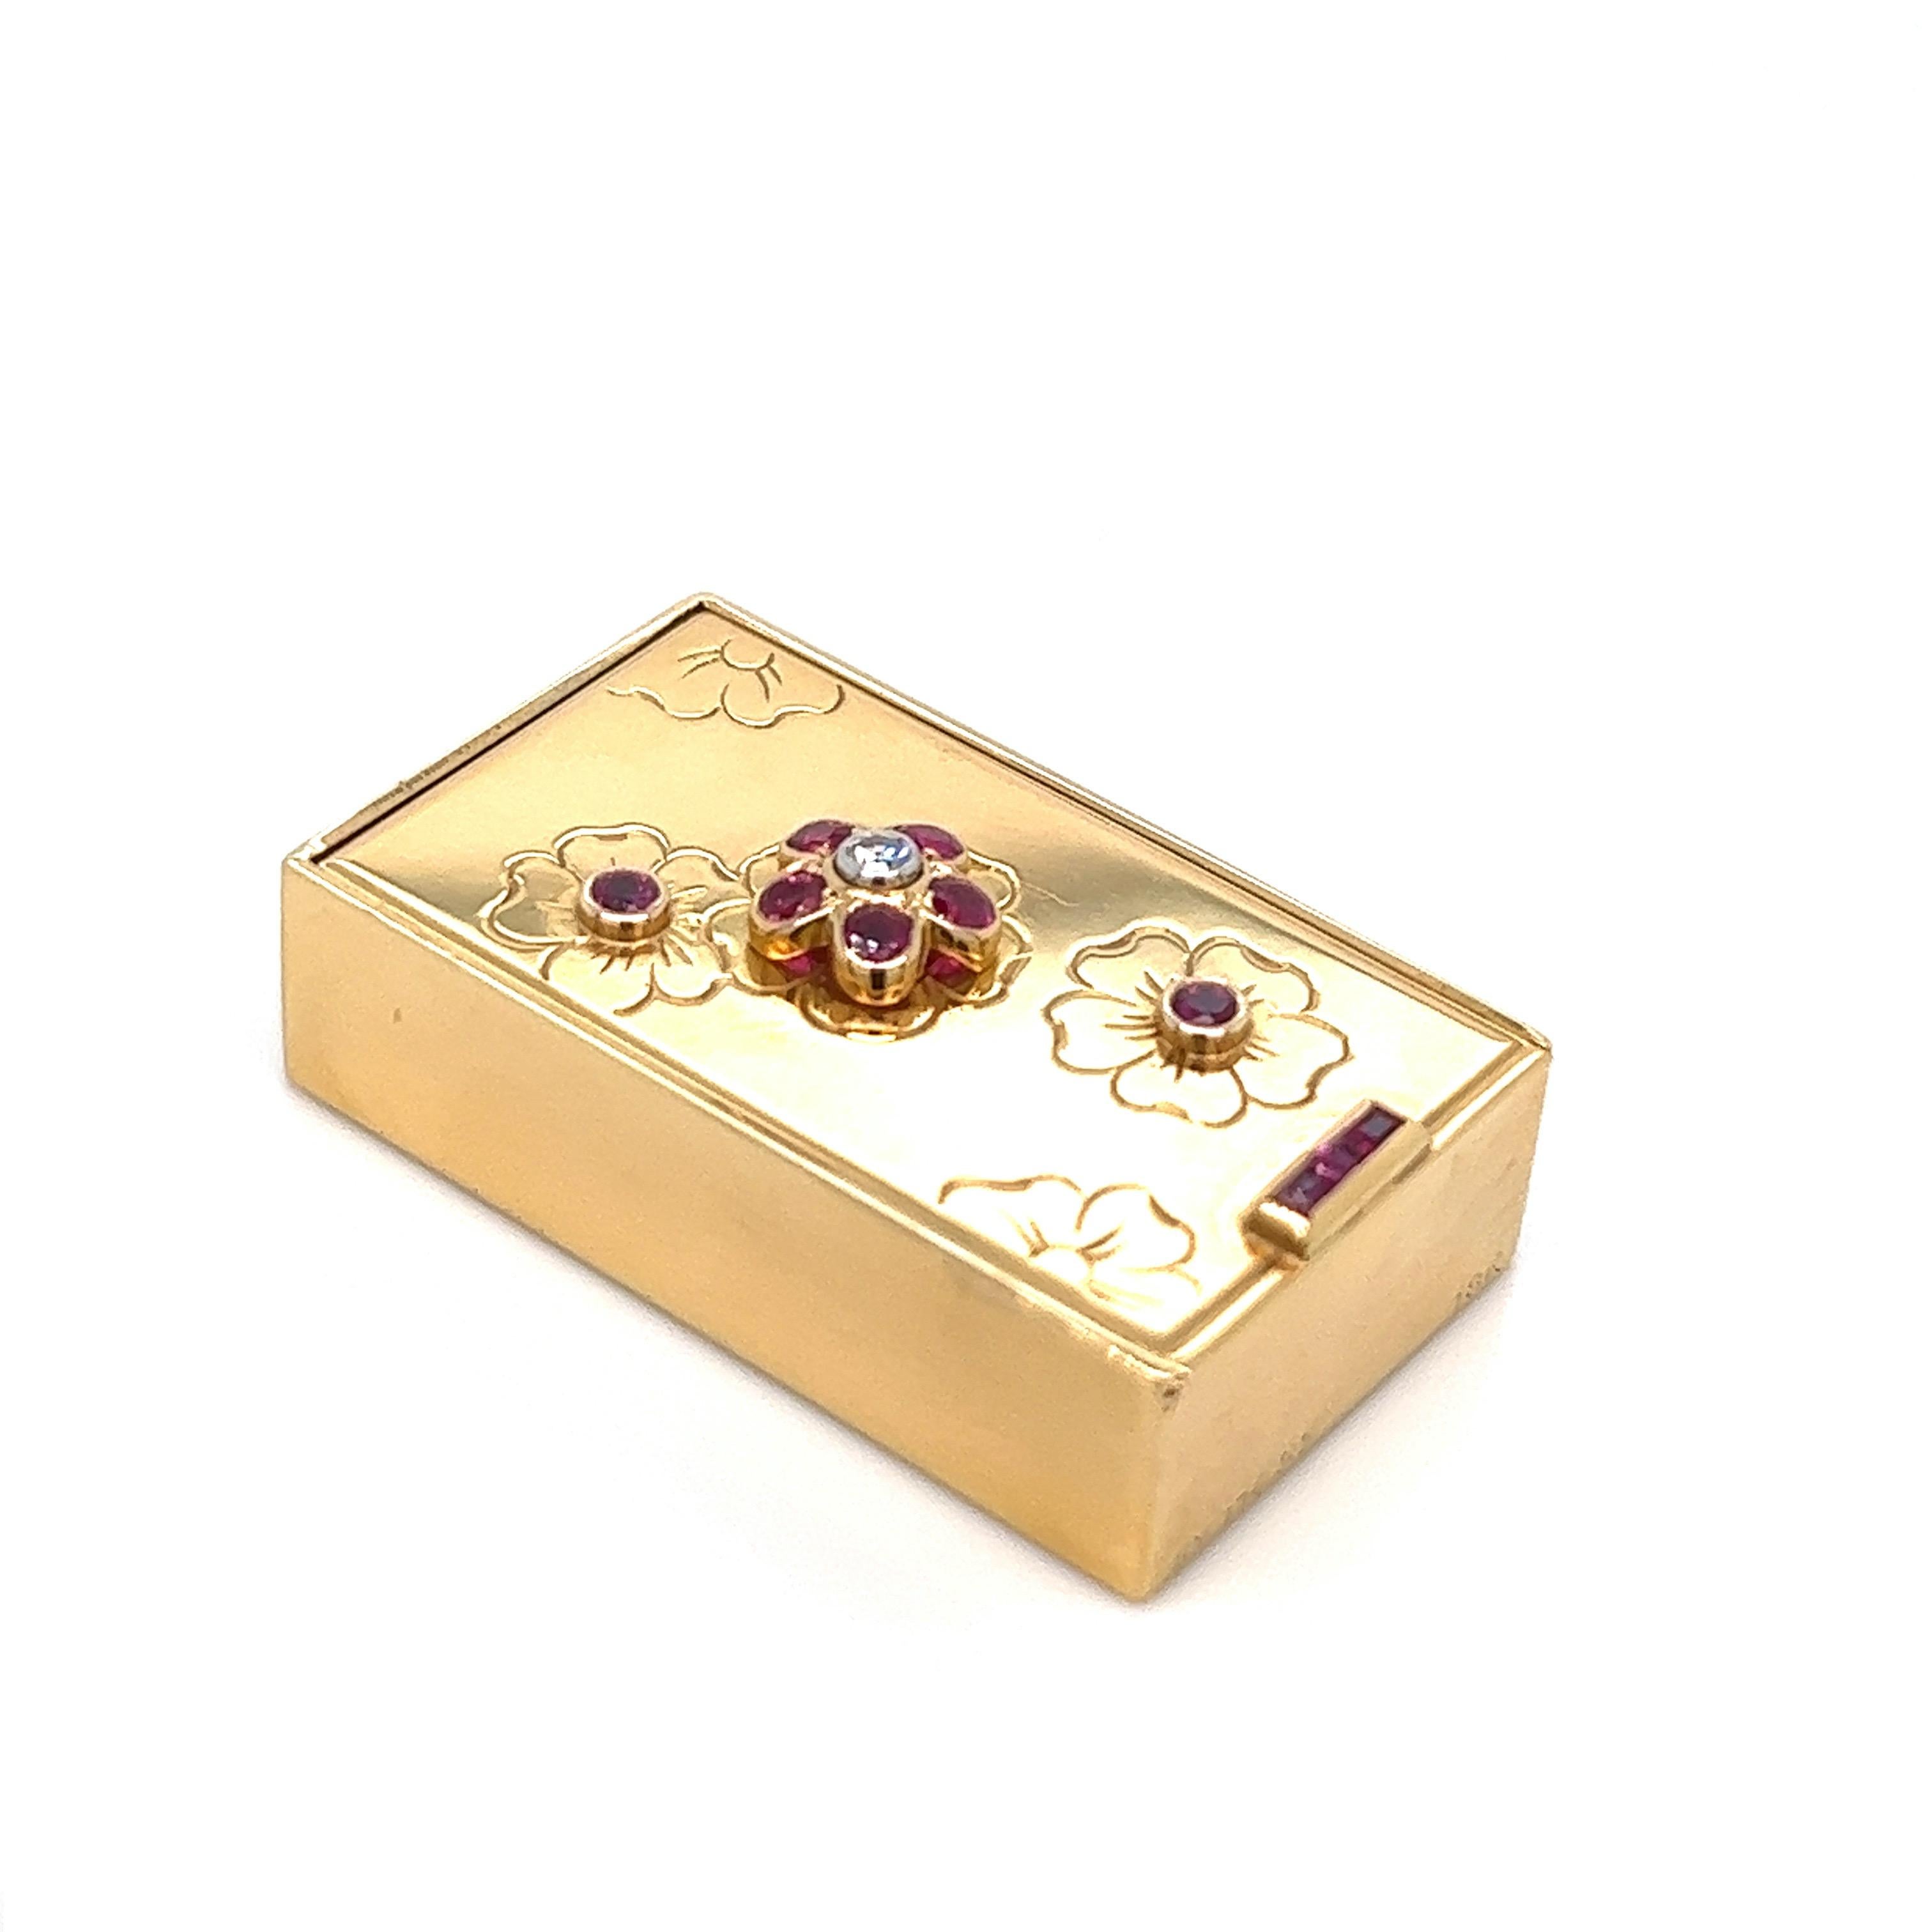 Van Cleef & Arpels gold travel clock, circa 1940s

18 karat yellow gold; marked Van Cleef & Arpels

Dimensions: length 3.3 cm, width 1.9 cm, depth 0.85 cm 
Total weight: 32.7 grams 

Comes with its own case 

Please note that it is not guaranteed